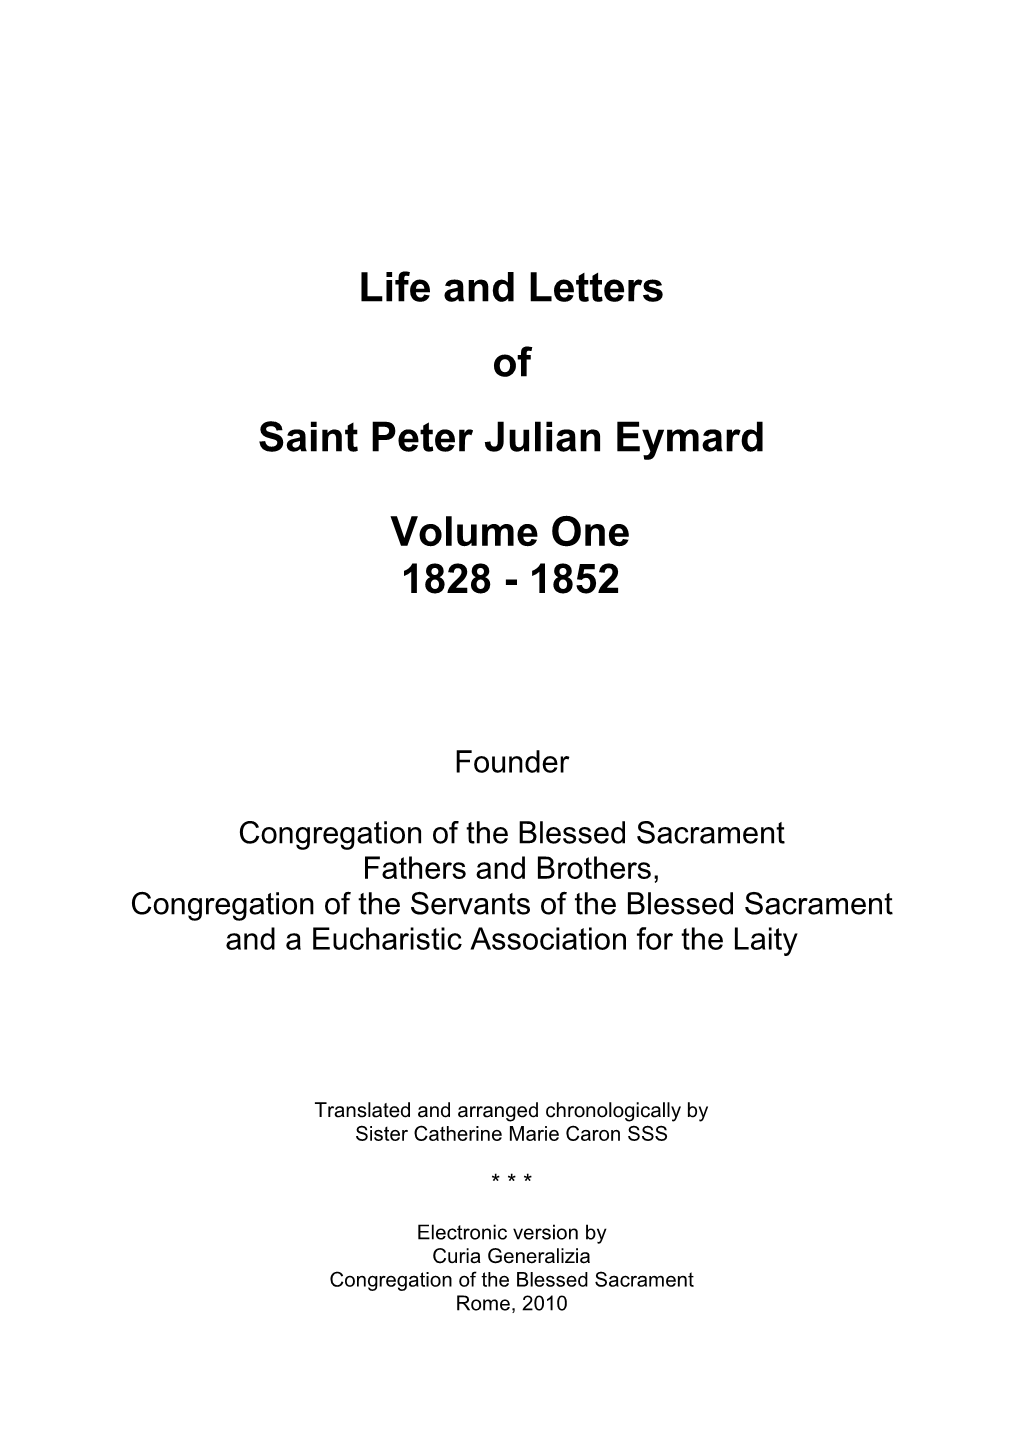 Life and Letters of Saint Peter Julian Eymard Volume One 1828